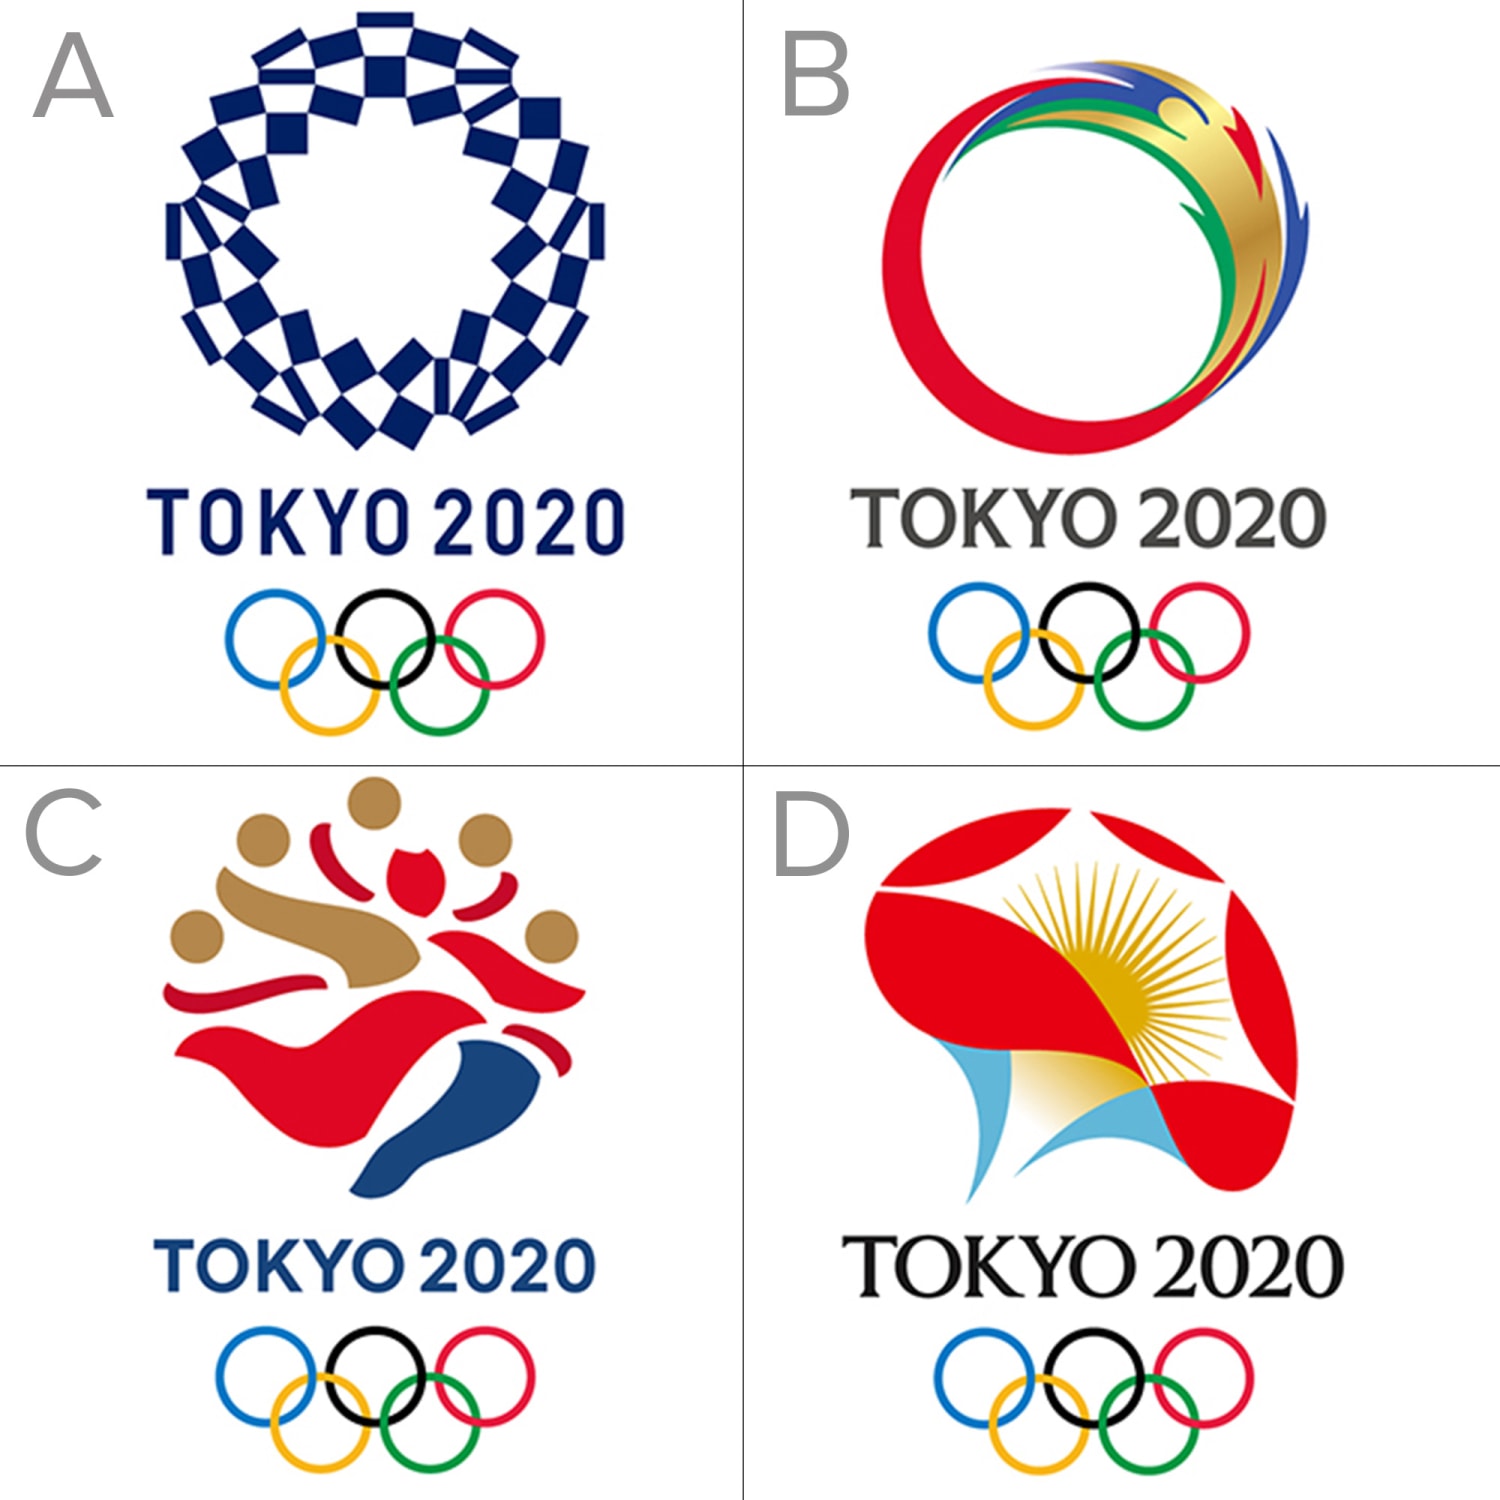 100,000 Olympic rings Vector Images | Depositphotos